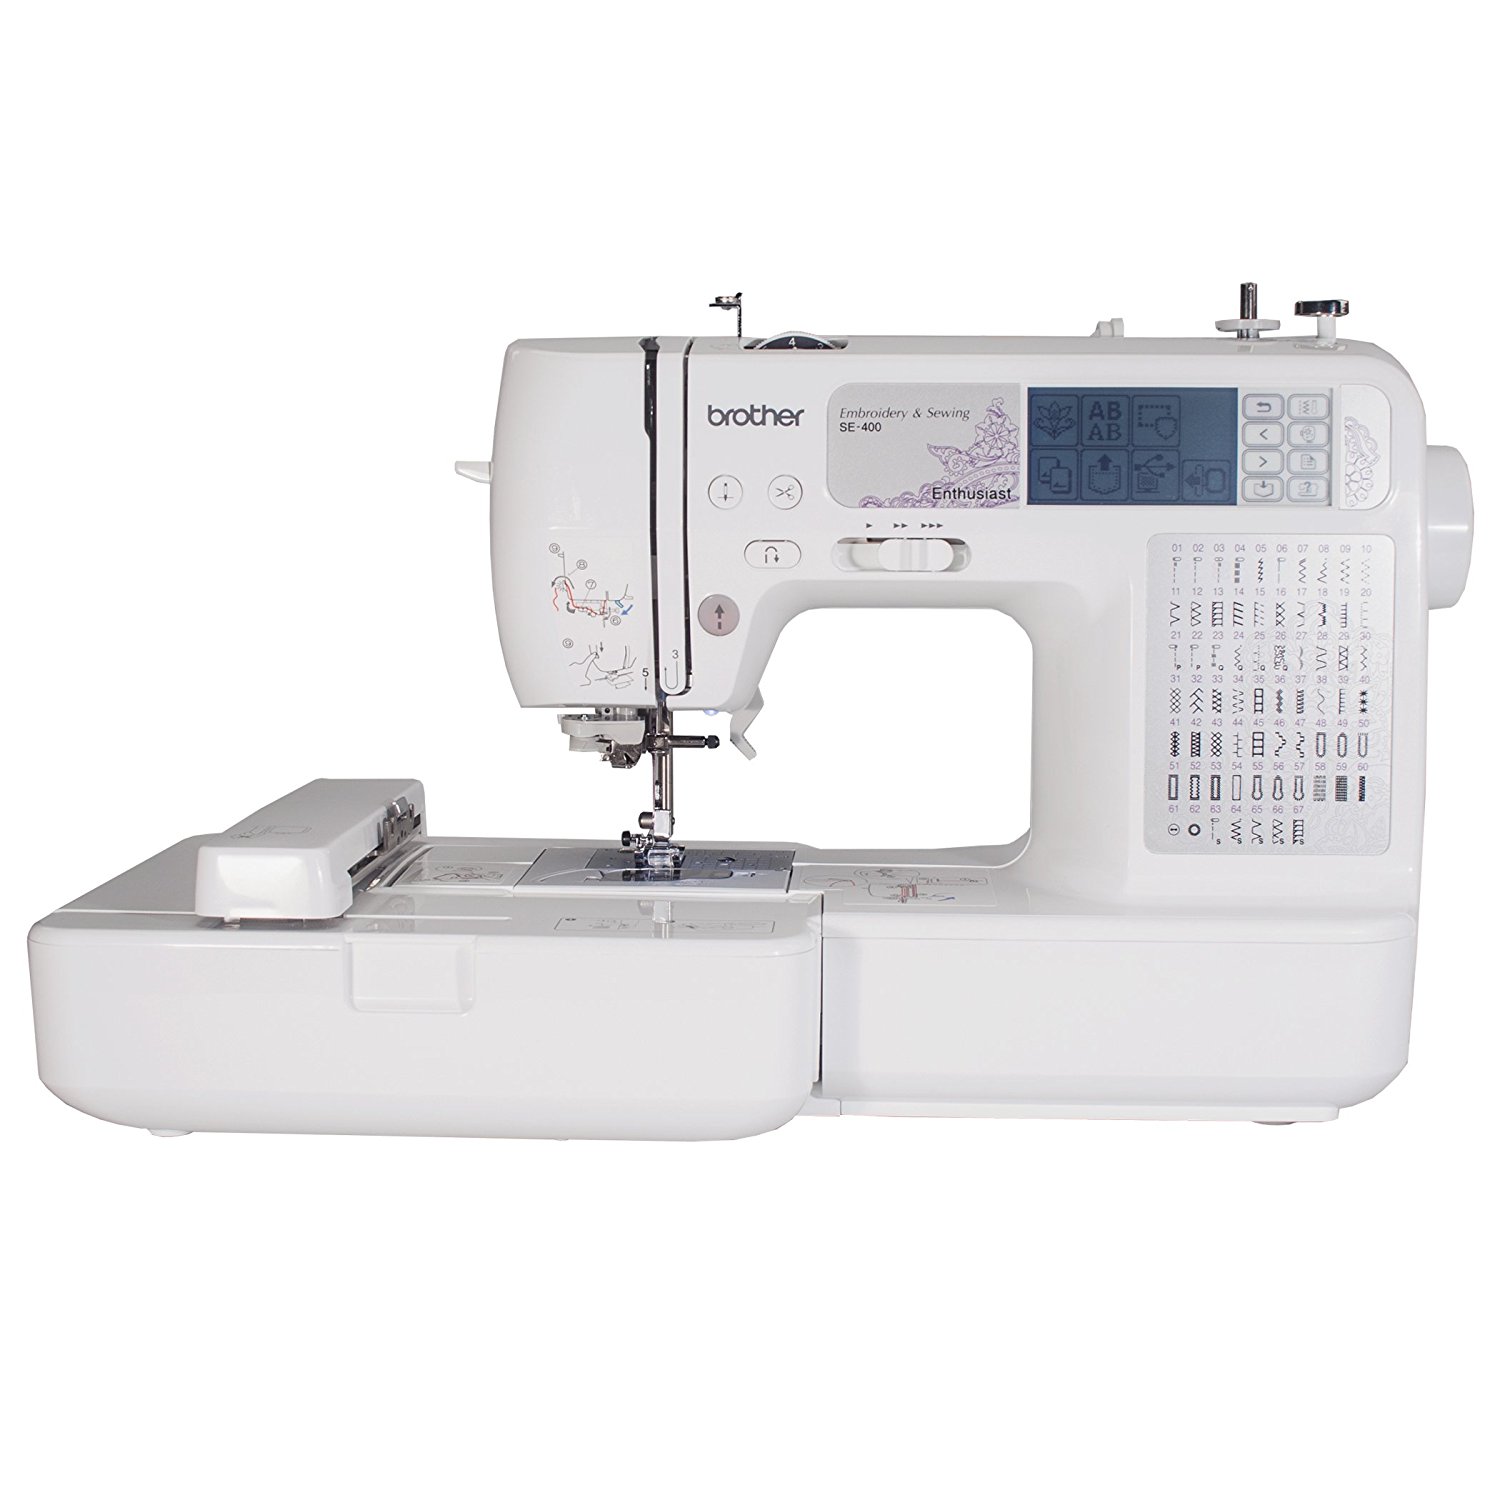 Best Brother Sewing & Embroidery Machine Review: The best combo machine from Brother you can buy